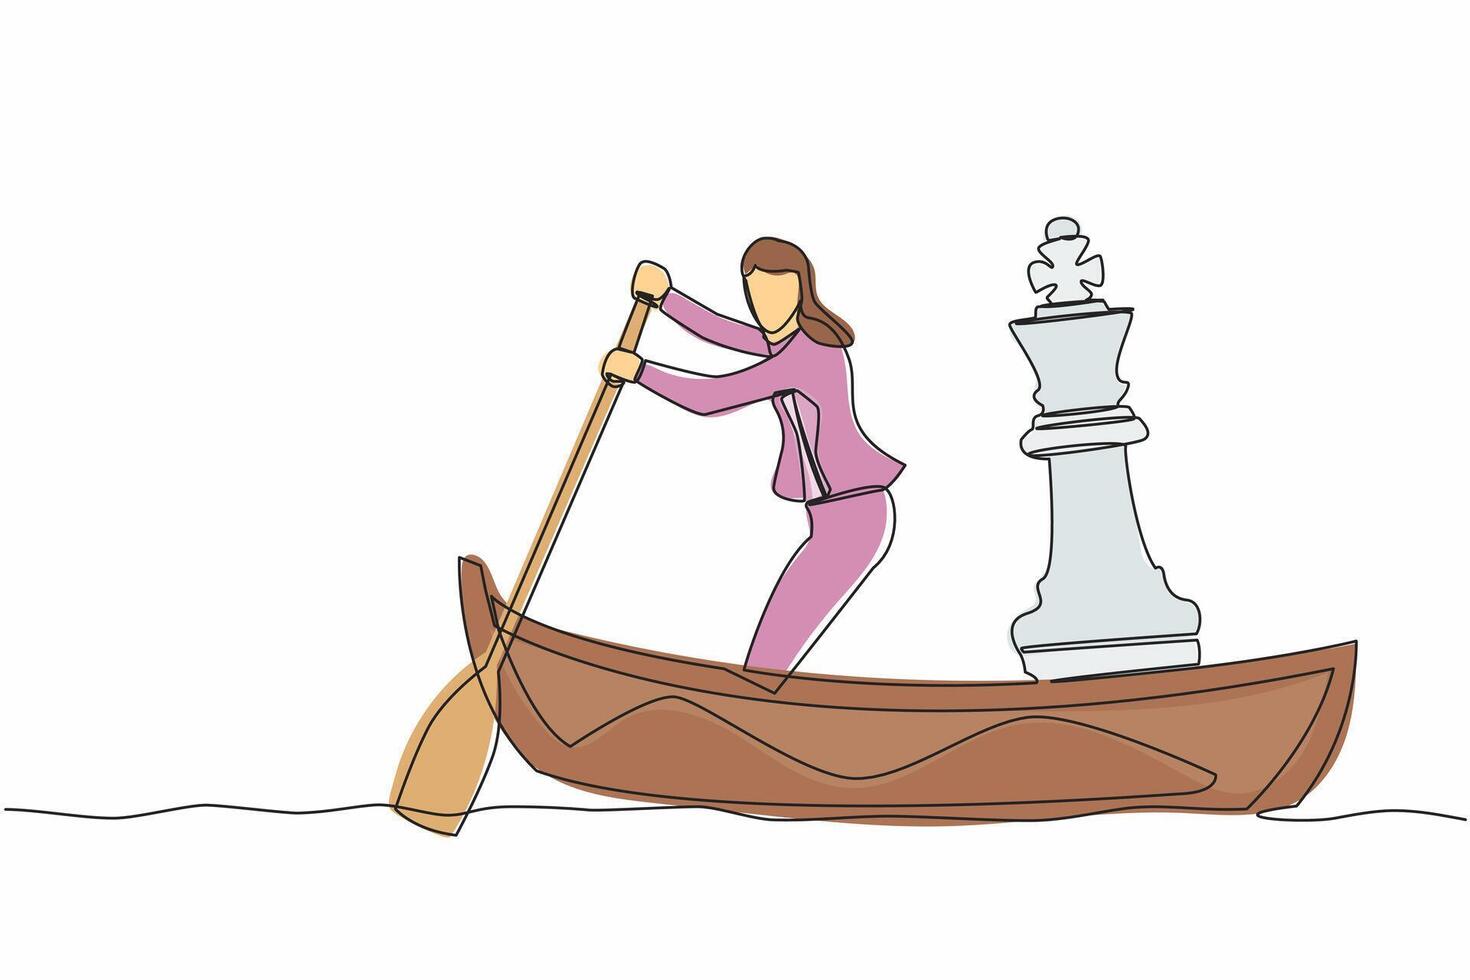 Single one line drawing businesswoman sailing away on boat with chess king piece. Company strategy or tactical move to winning business competition. Continuous line design graphic vector illustration